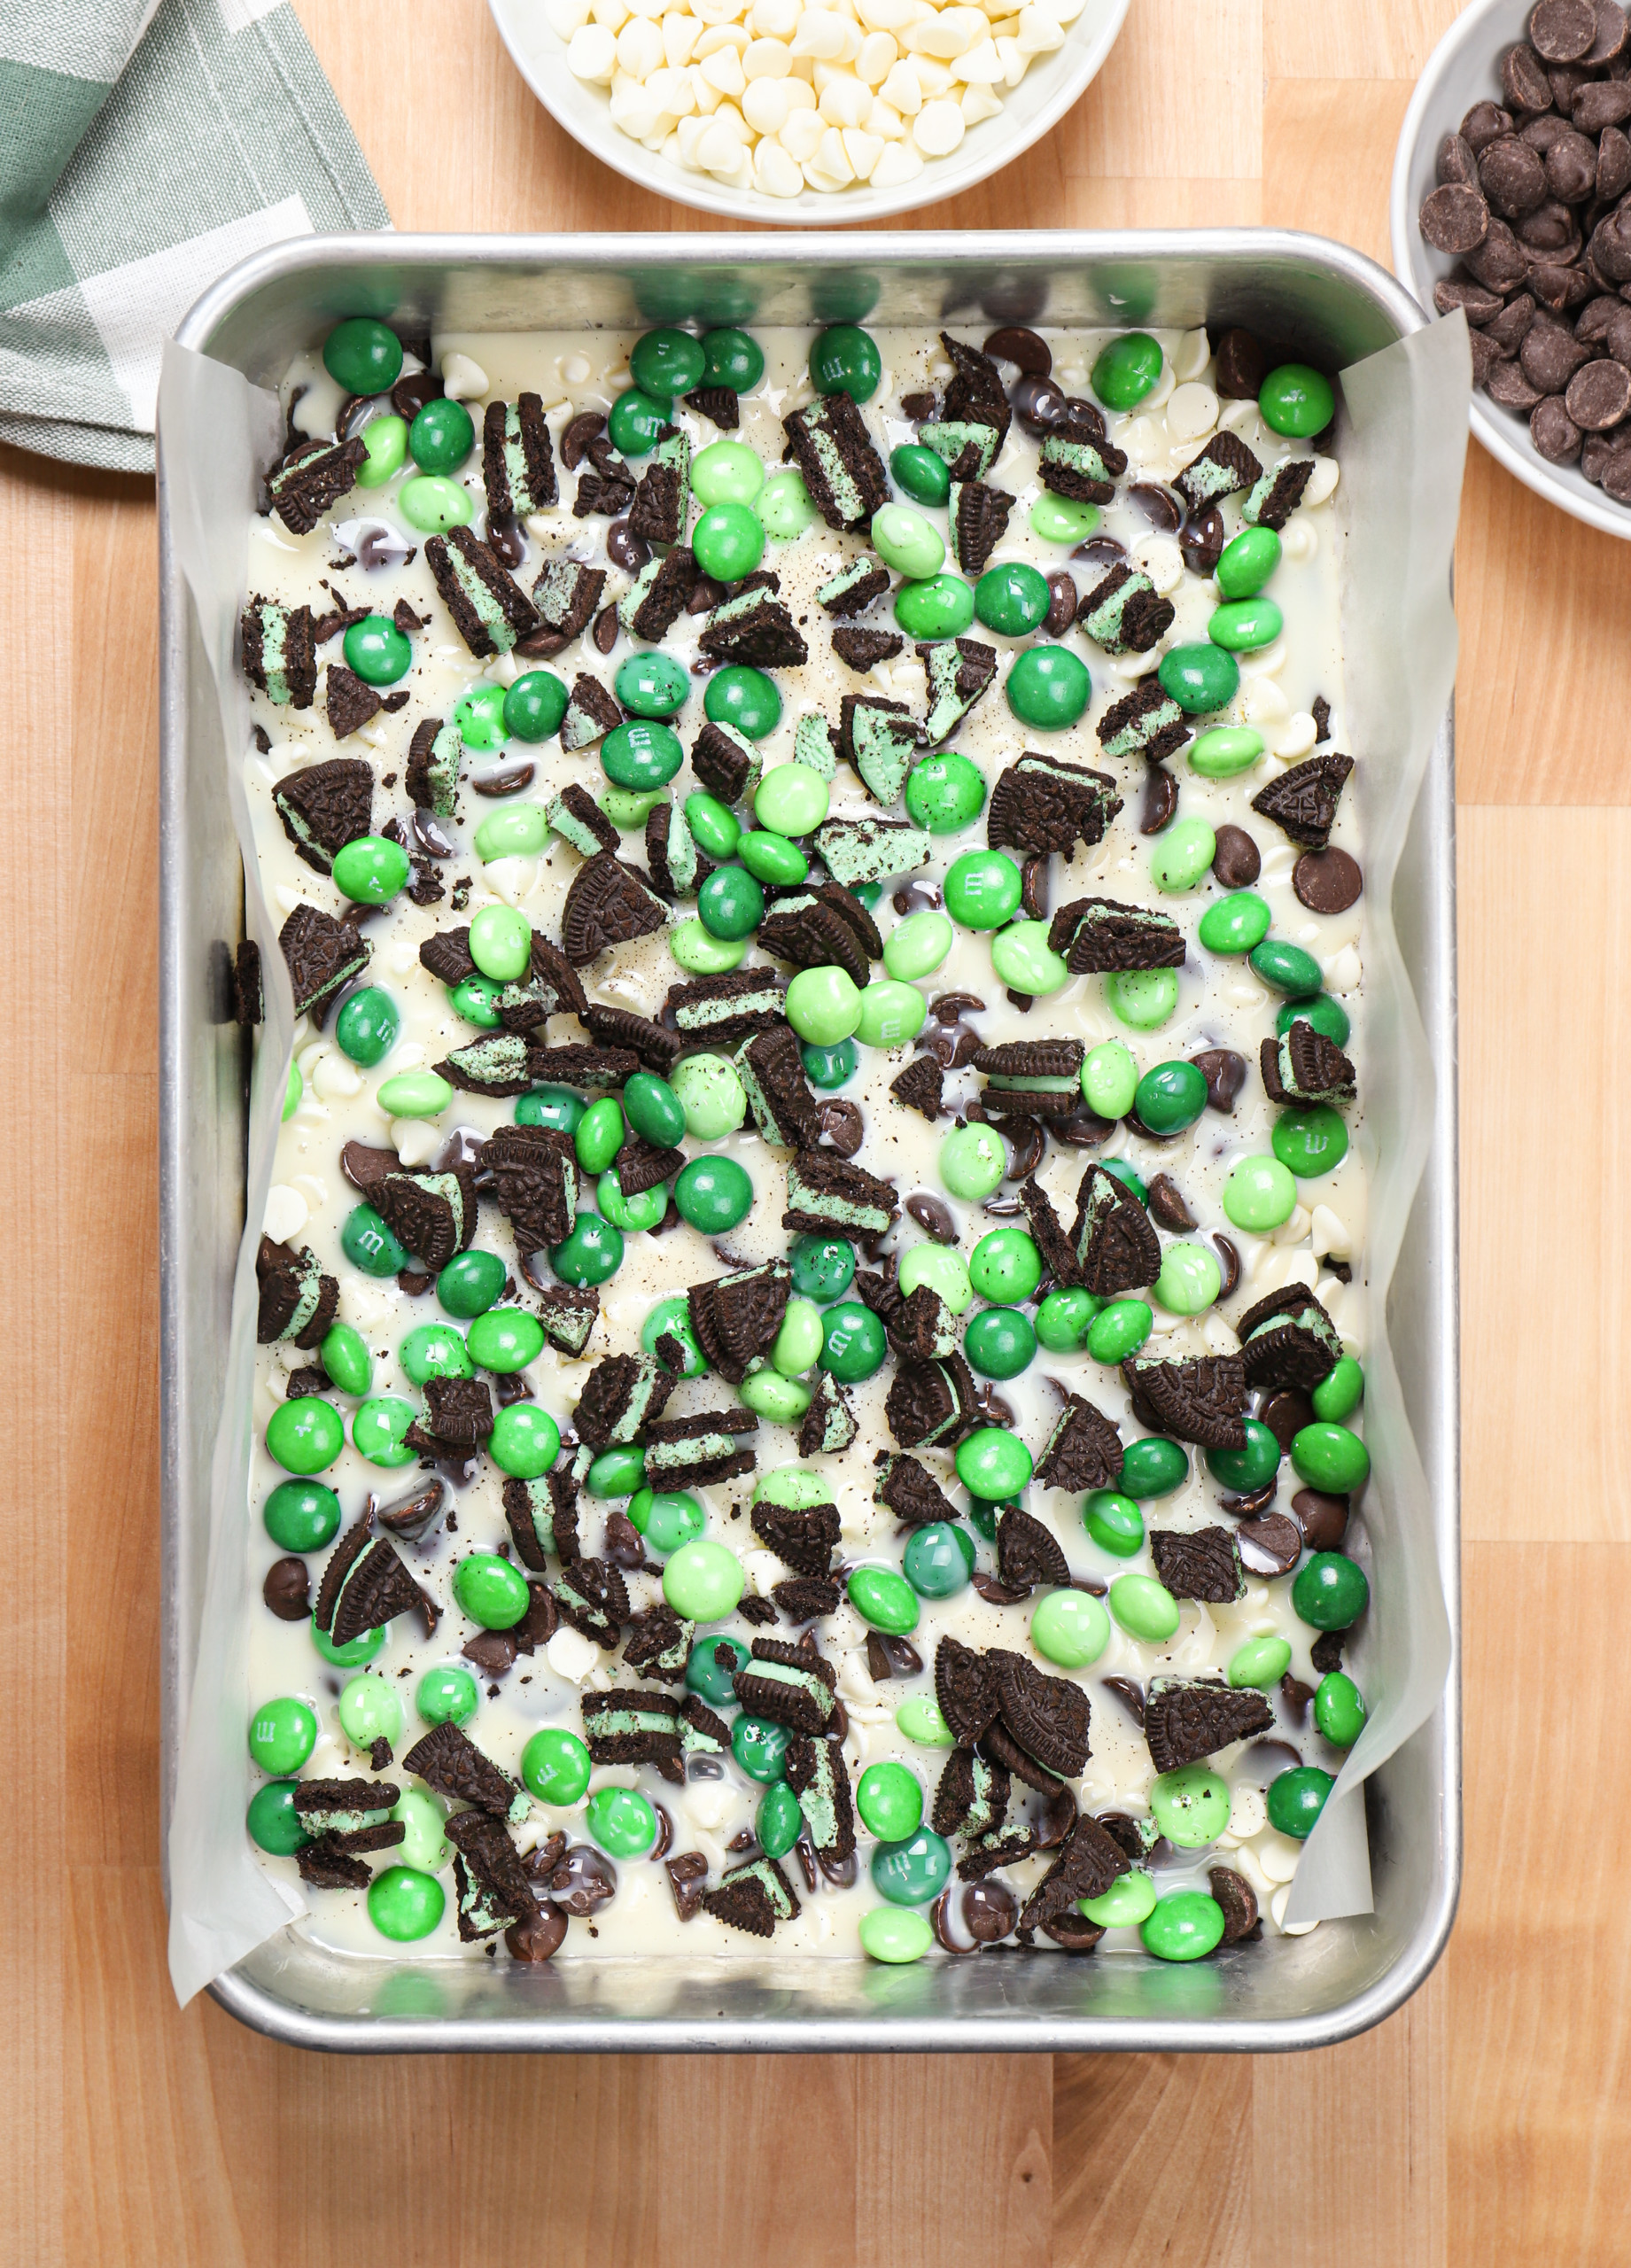 Overhead view of a batch of mint chocolate seven layer bars before they are baked.